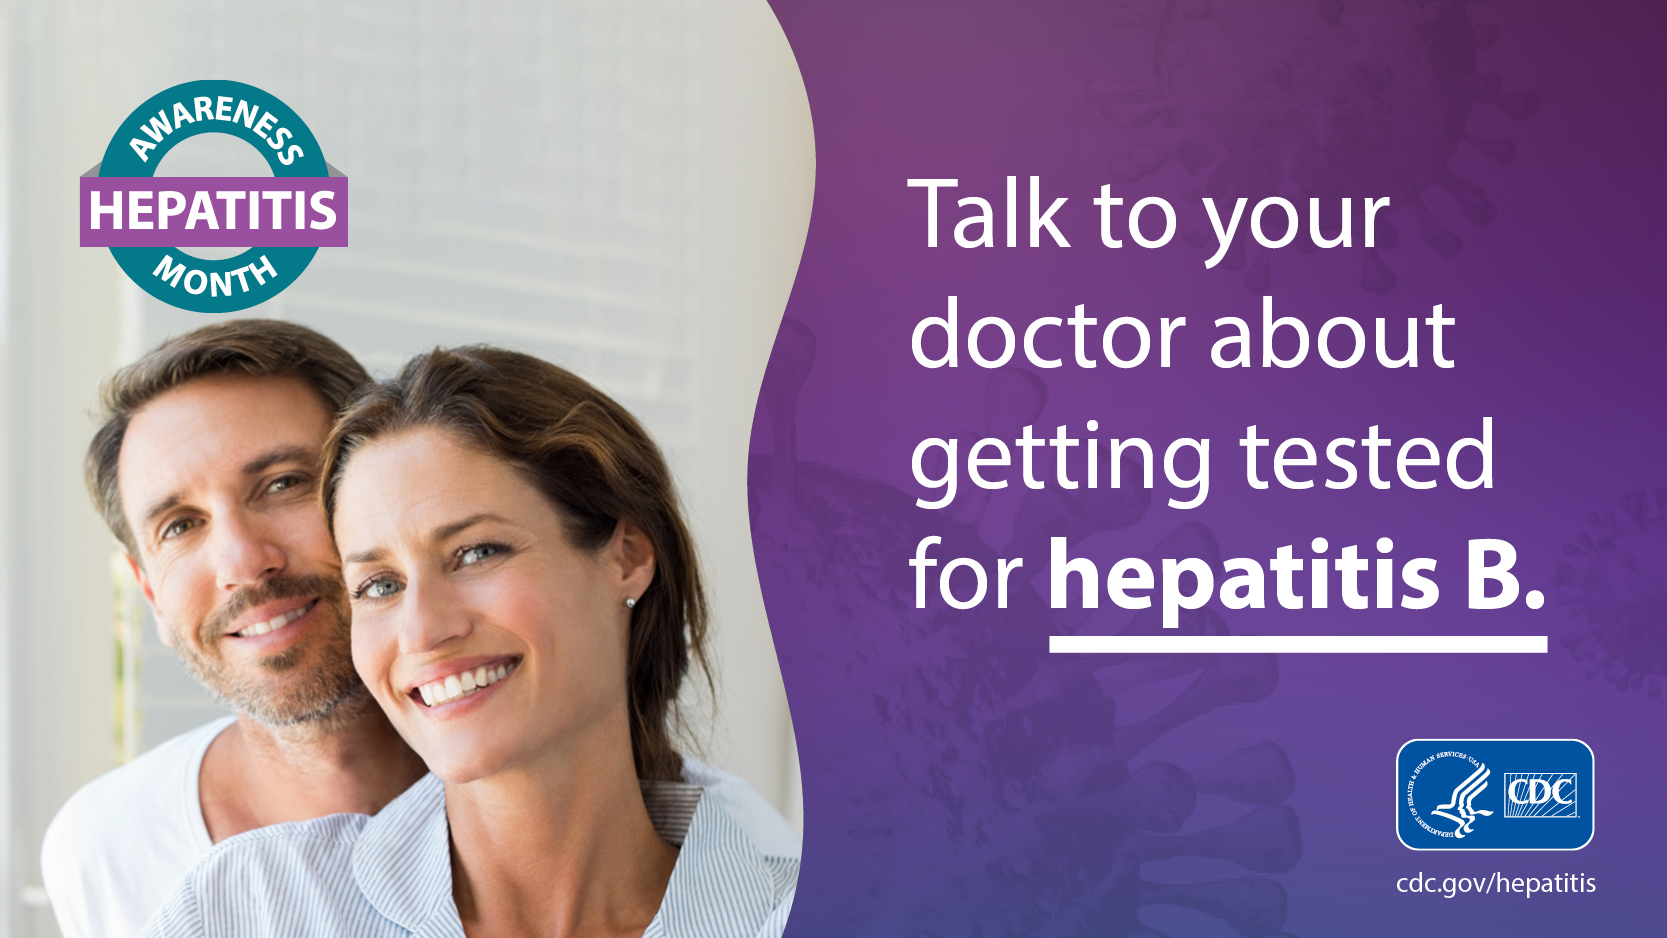 Man and woman smile at camera. Text: Talk to your doctor about getting tested for hepatitis B.